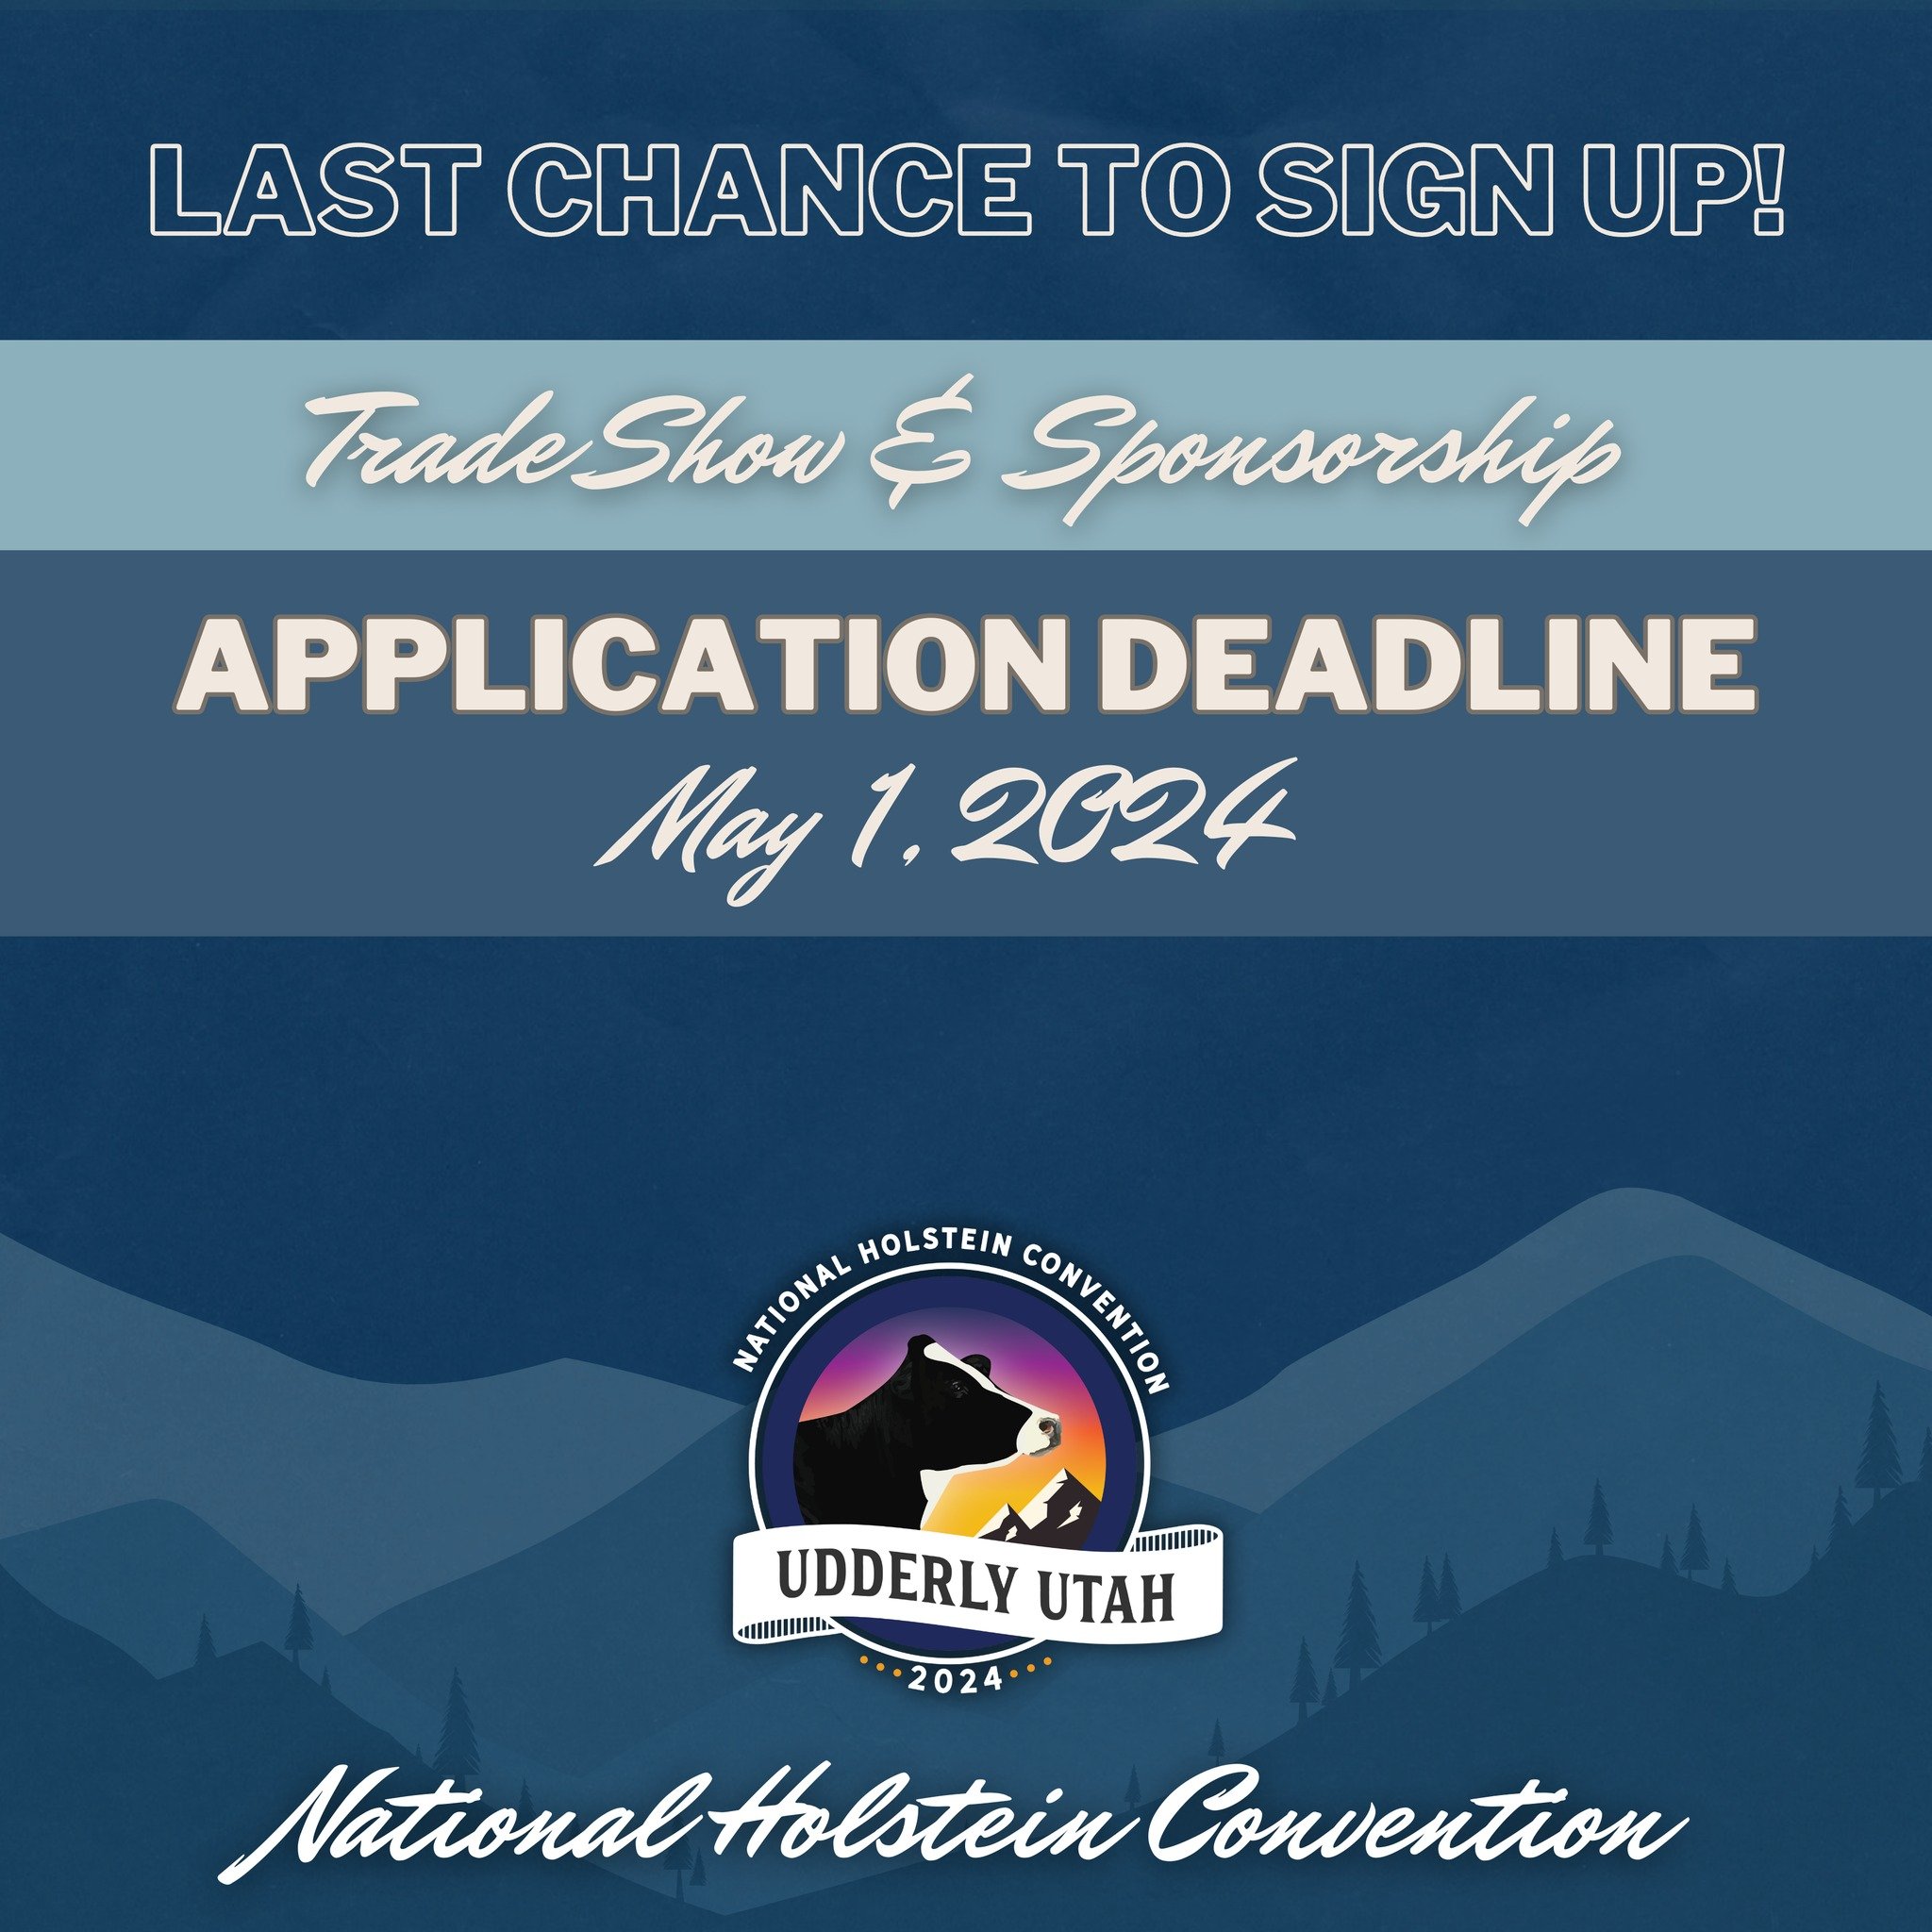 🚨 Last Chance Alert! 🚨
 
Tomorrow is the final day to become a sponsor or secure a trade show booth! Discover more about sponsorship opportunities, trade show details, and advertising options by visiting our website at the link in our bio!